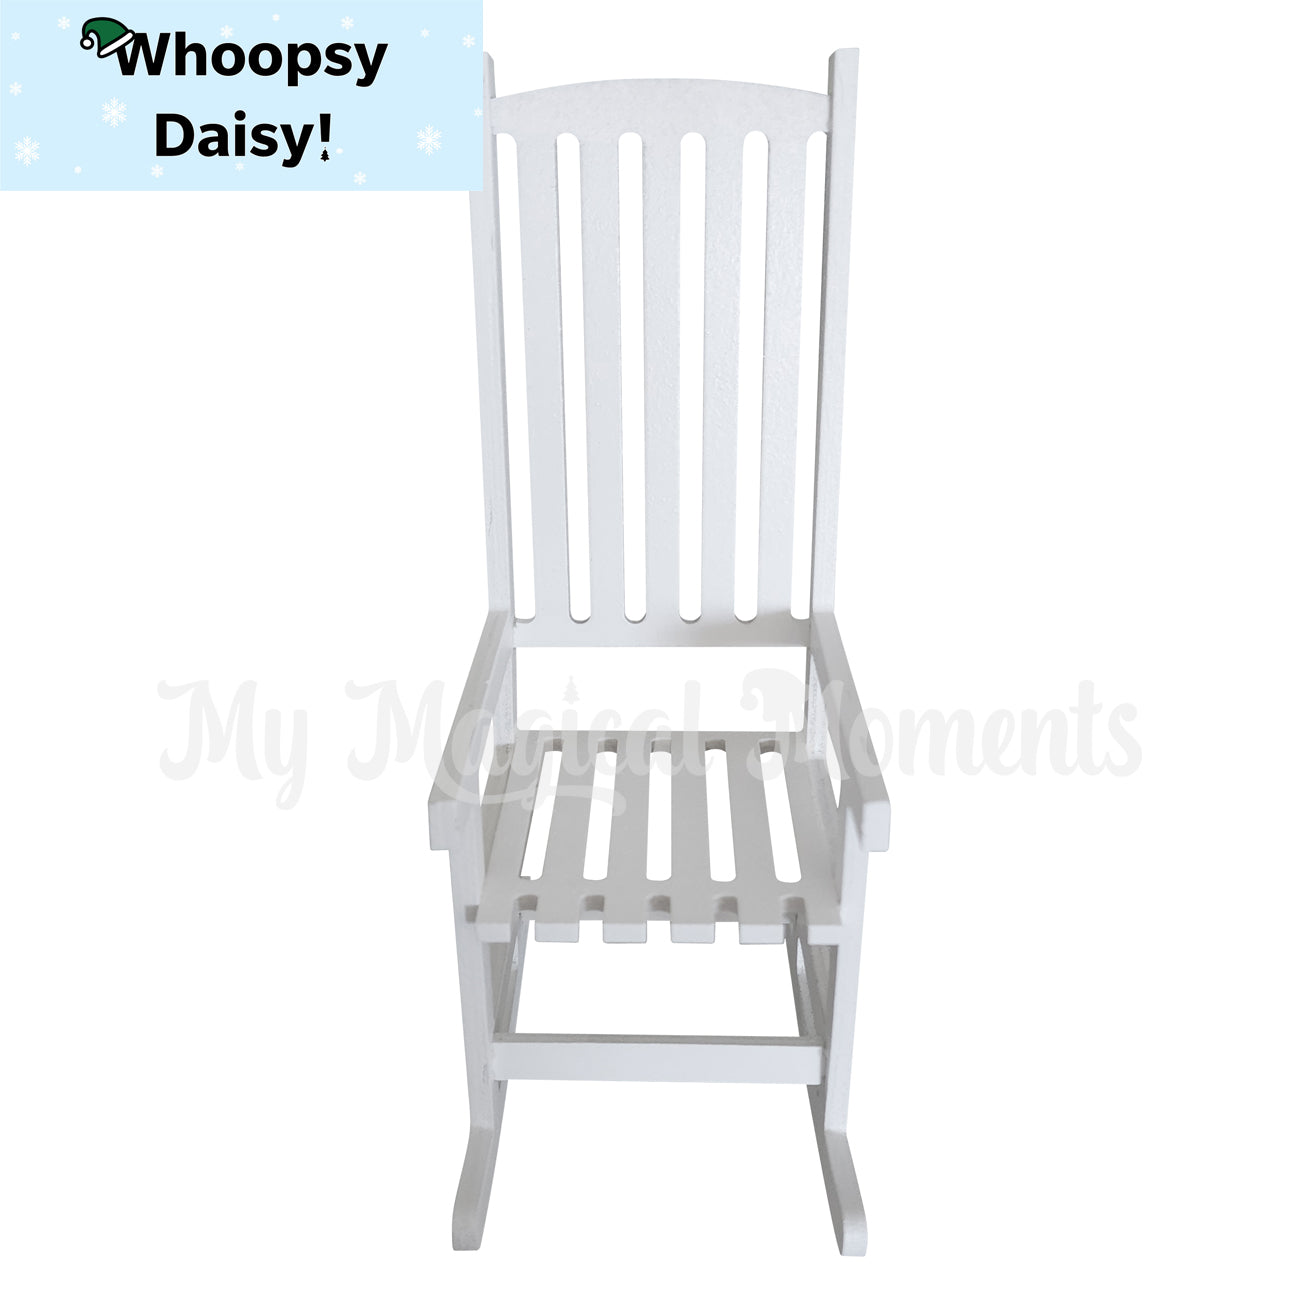 Rocking Chair - Whoopsy Daisy (Imperfect)